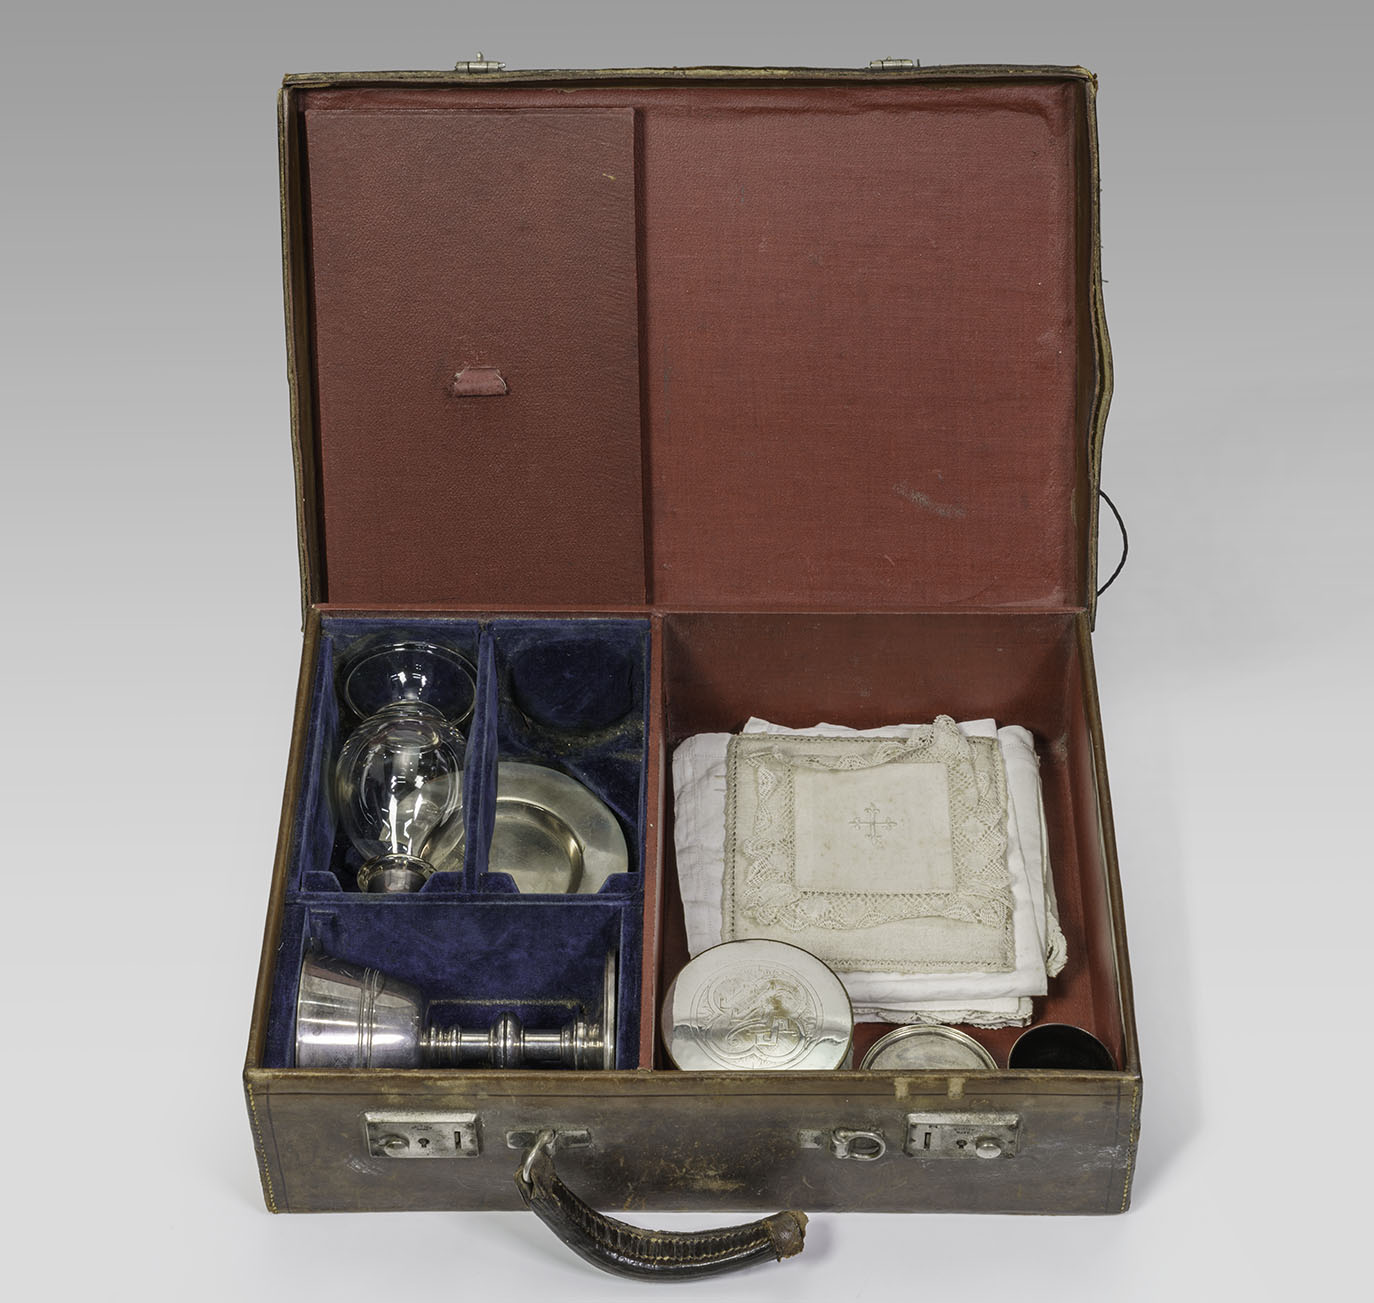 Modern photograph of a brown leather case that's been opened to show several compartments inside containing folded white loth, a silver-colored plate and chalice, and various metal and glass containers.